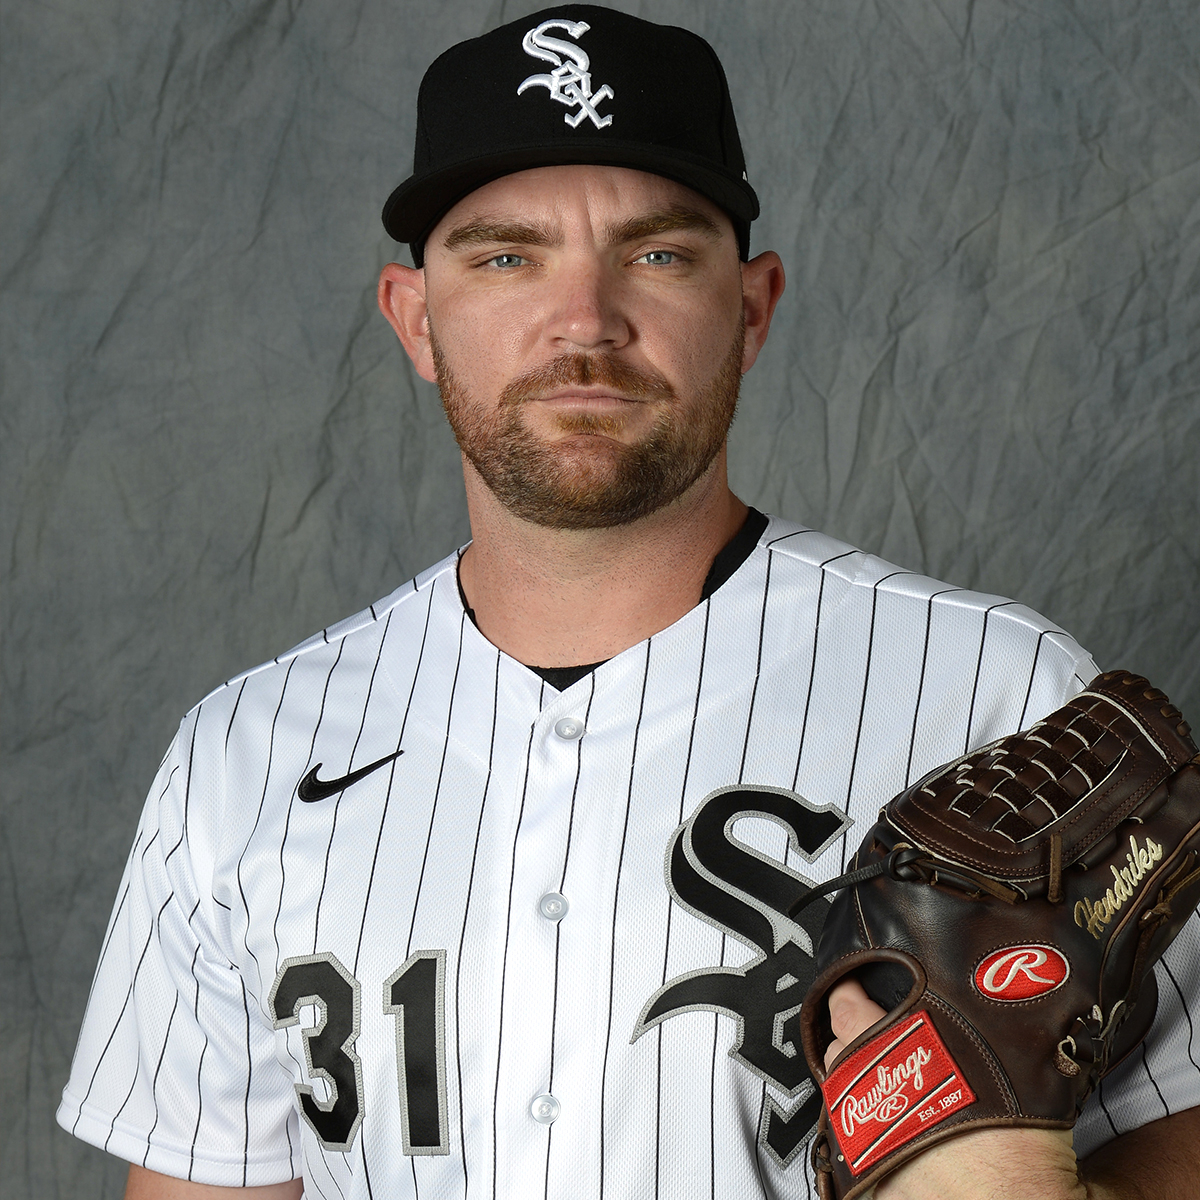 4 Months After Cancer Diagnosis, Chicago White Sox Pitcher Leaves